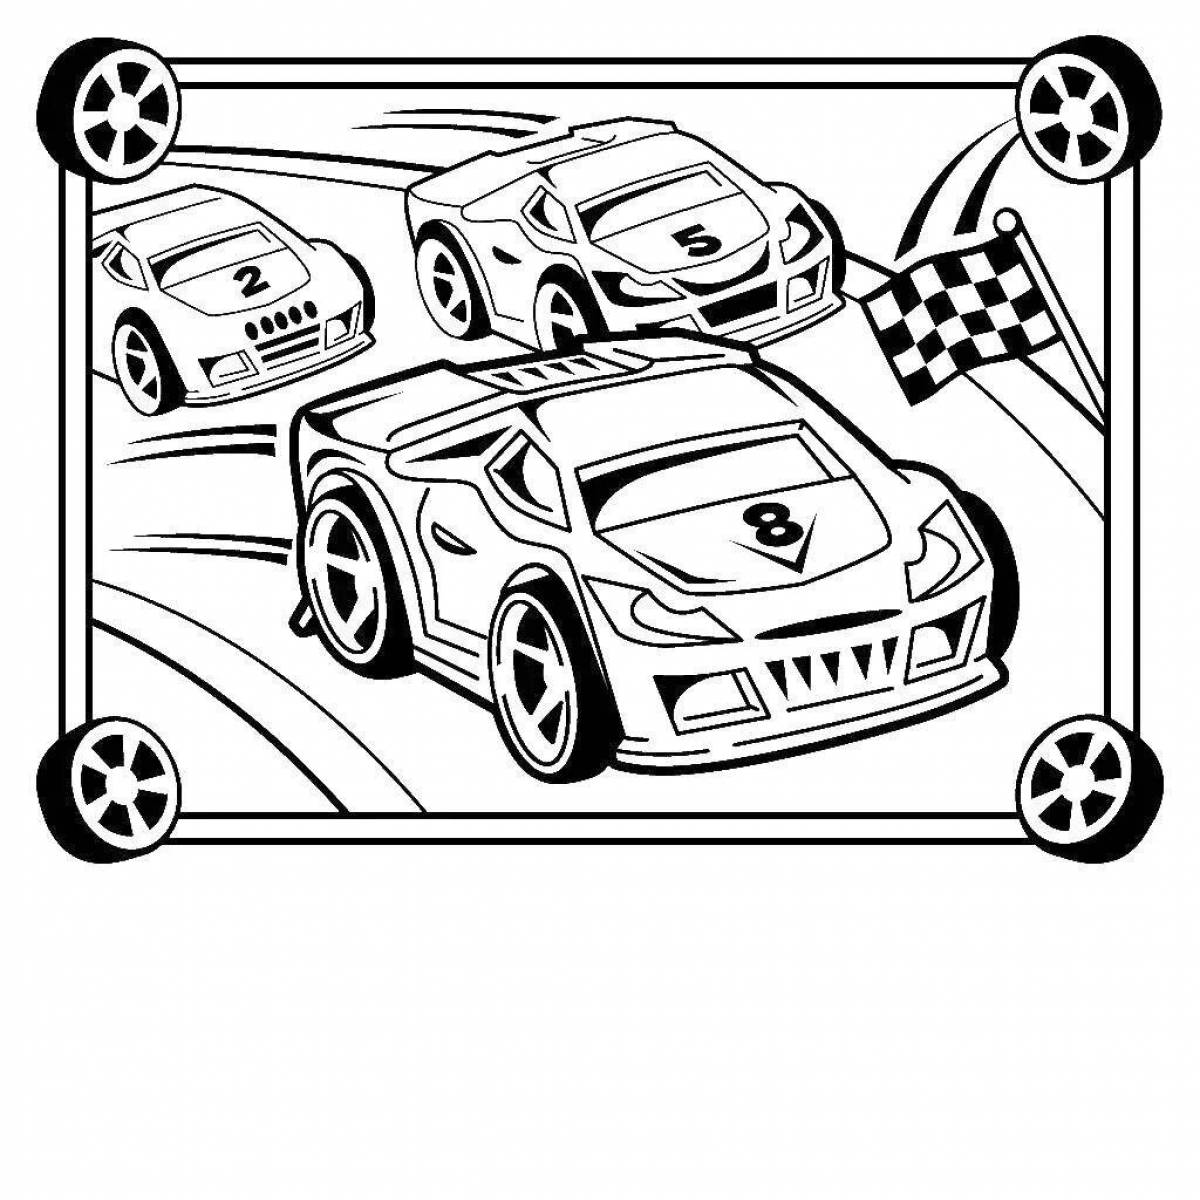 Innovation Racing 2 coloring page